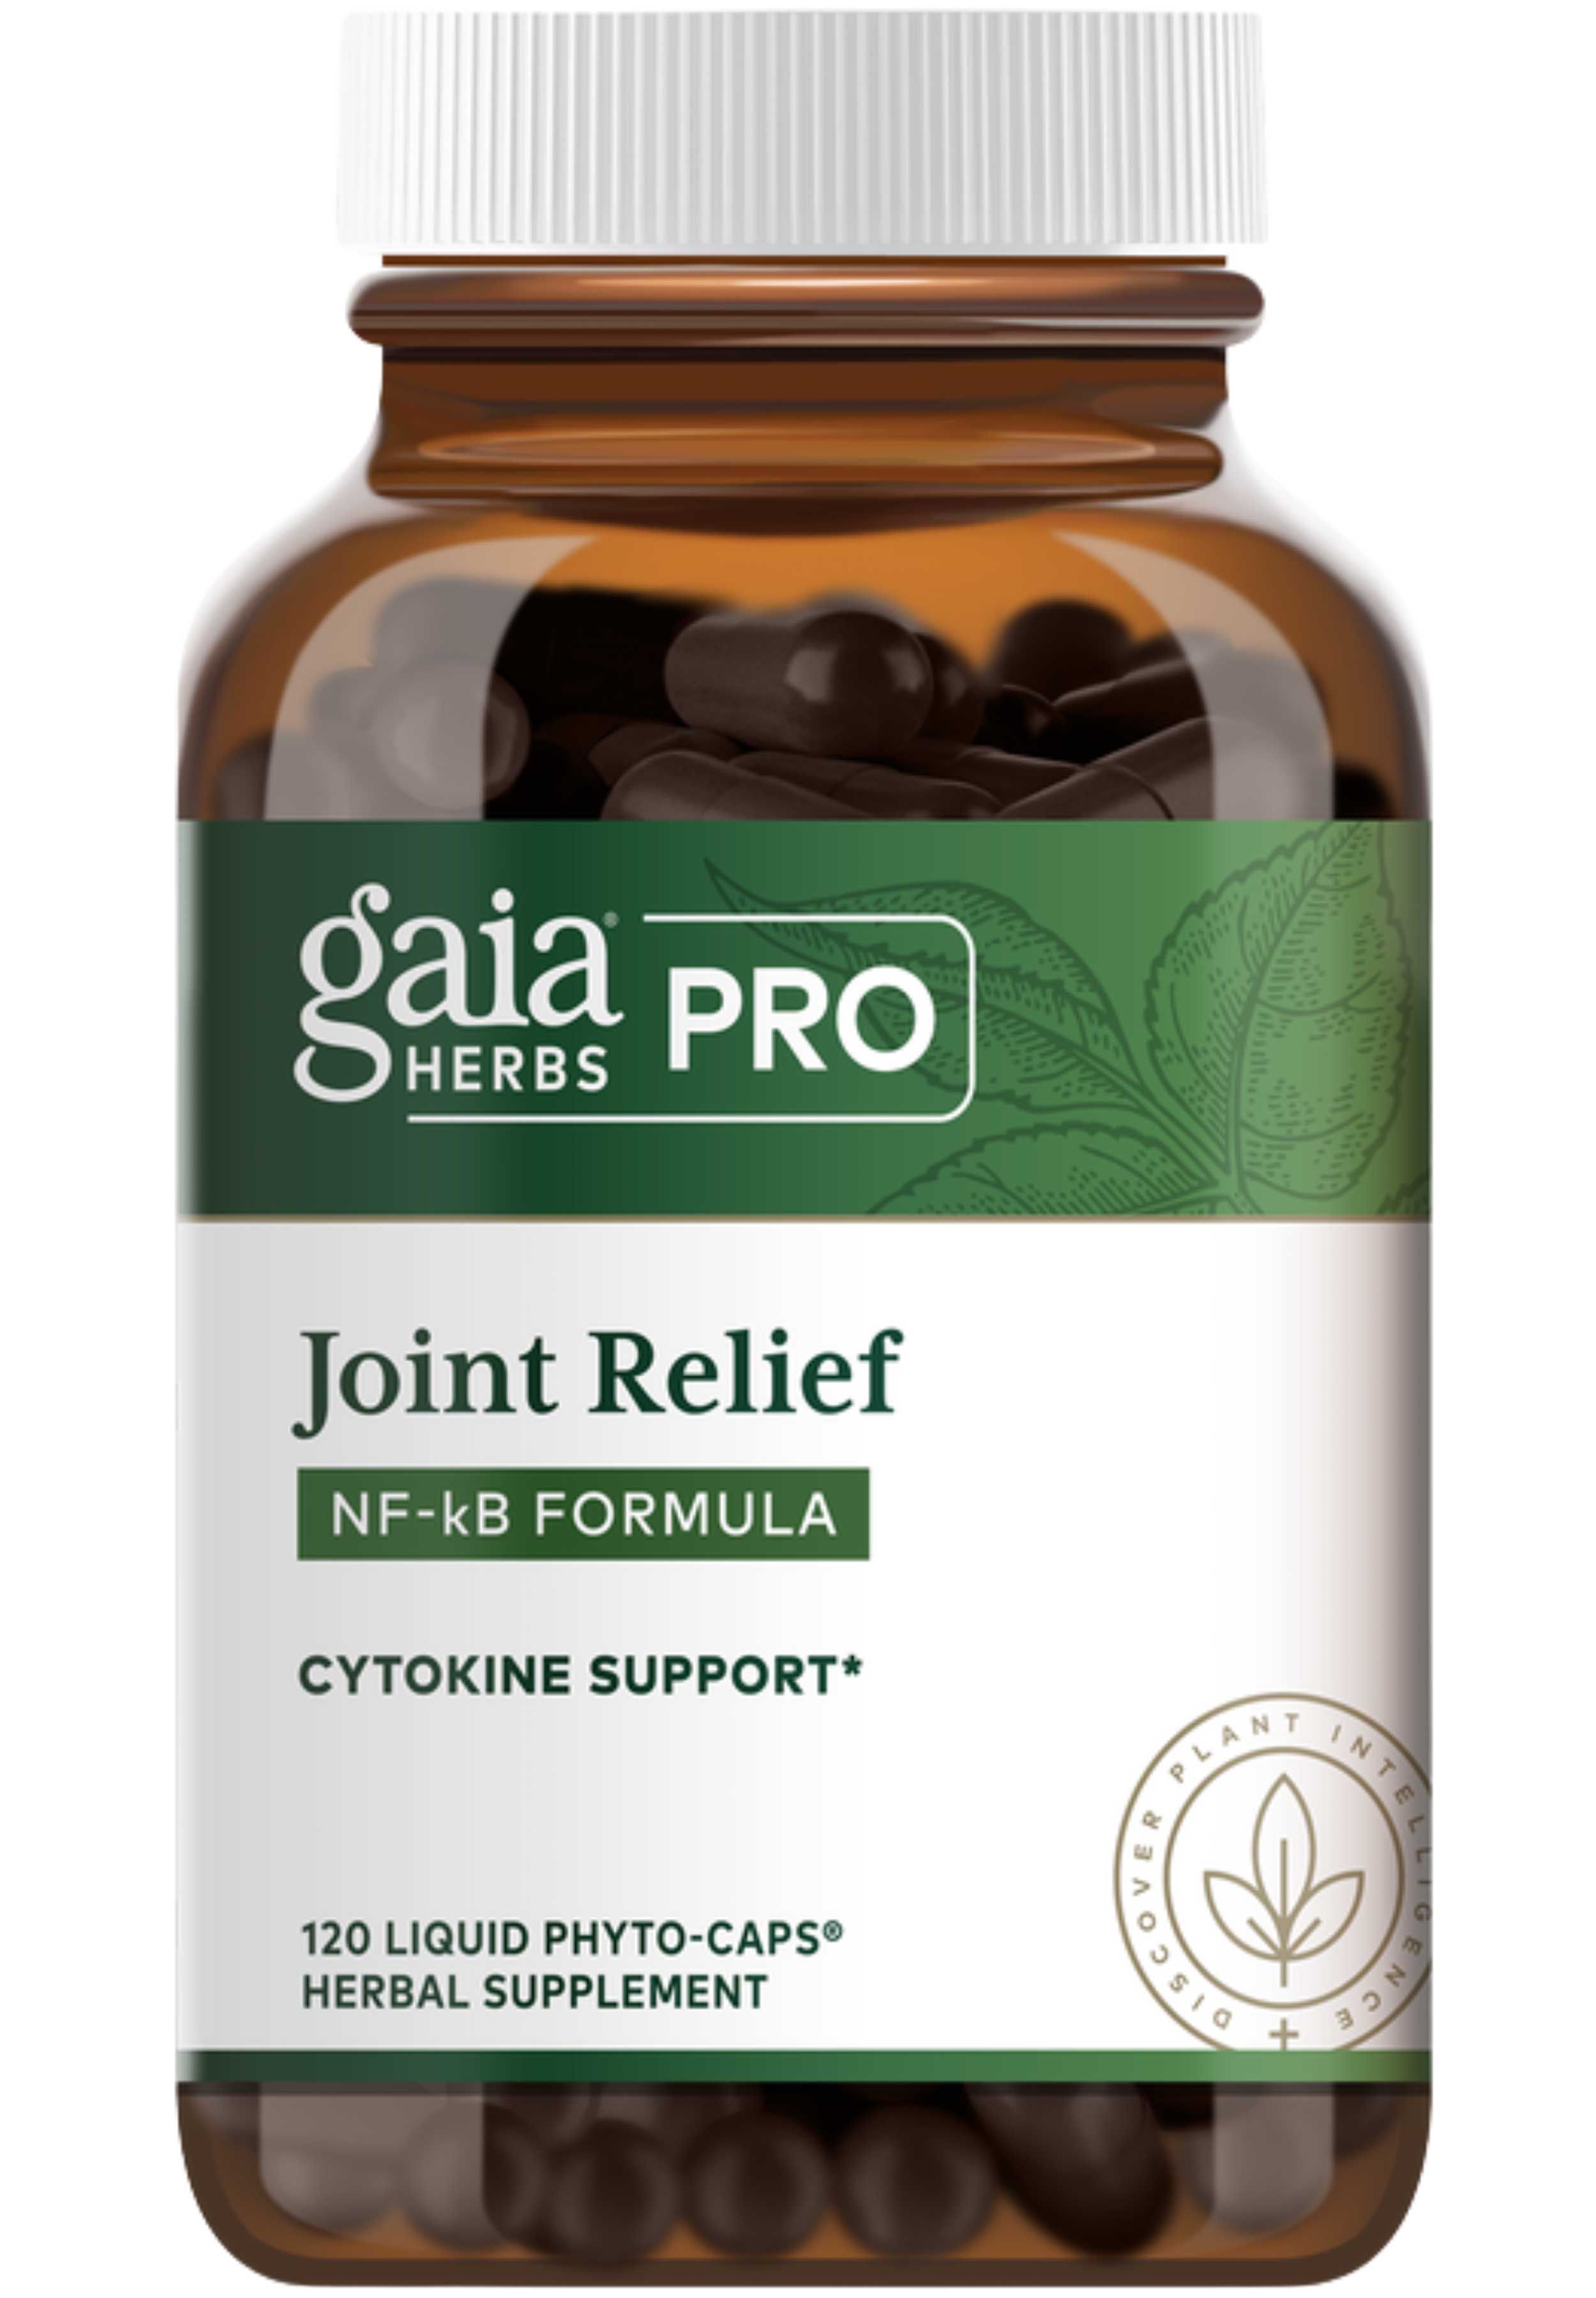 Gaia Herbs Professional Solutions Joint Relief: NF-kB Formula (Formerly Curcuma NF-kB: Musculoskeletal)